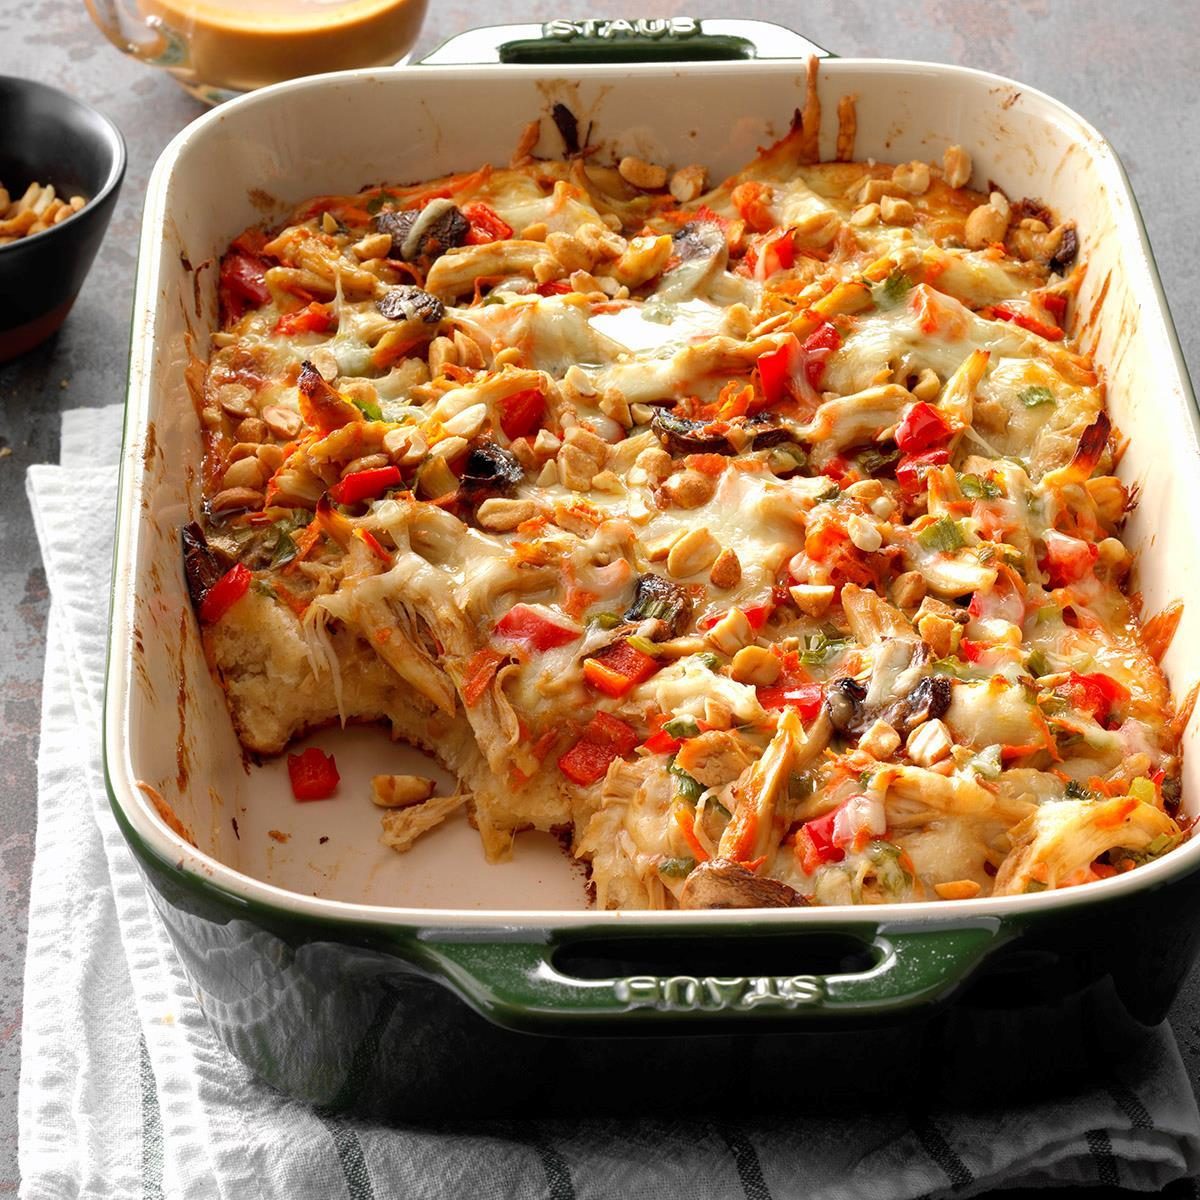 <p>This pasta is a must-try smoked sausage recipe. It just tastes so good when it’s hot and bubbly from the oven. The cheddar french-fried onions lend a cheesy, crunchy touch. —Margaret Wilson, Sun City, California</p> <div class="listicle-page__buttons"> <div class="listicle-page__cta-button"><a href='https://www.tasteofhome.com/recipes/penne-and-smoked-sausage/'>Get Recipe</a></div> </div>